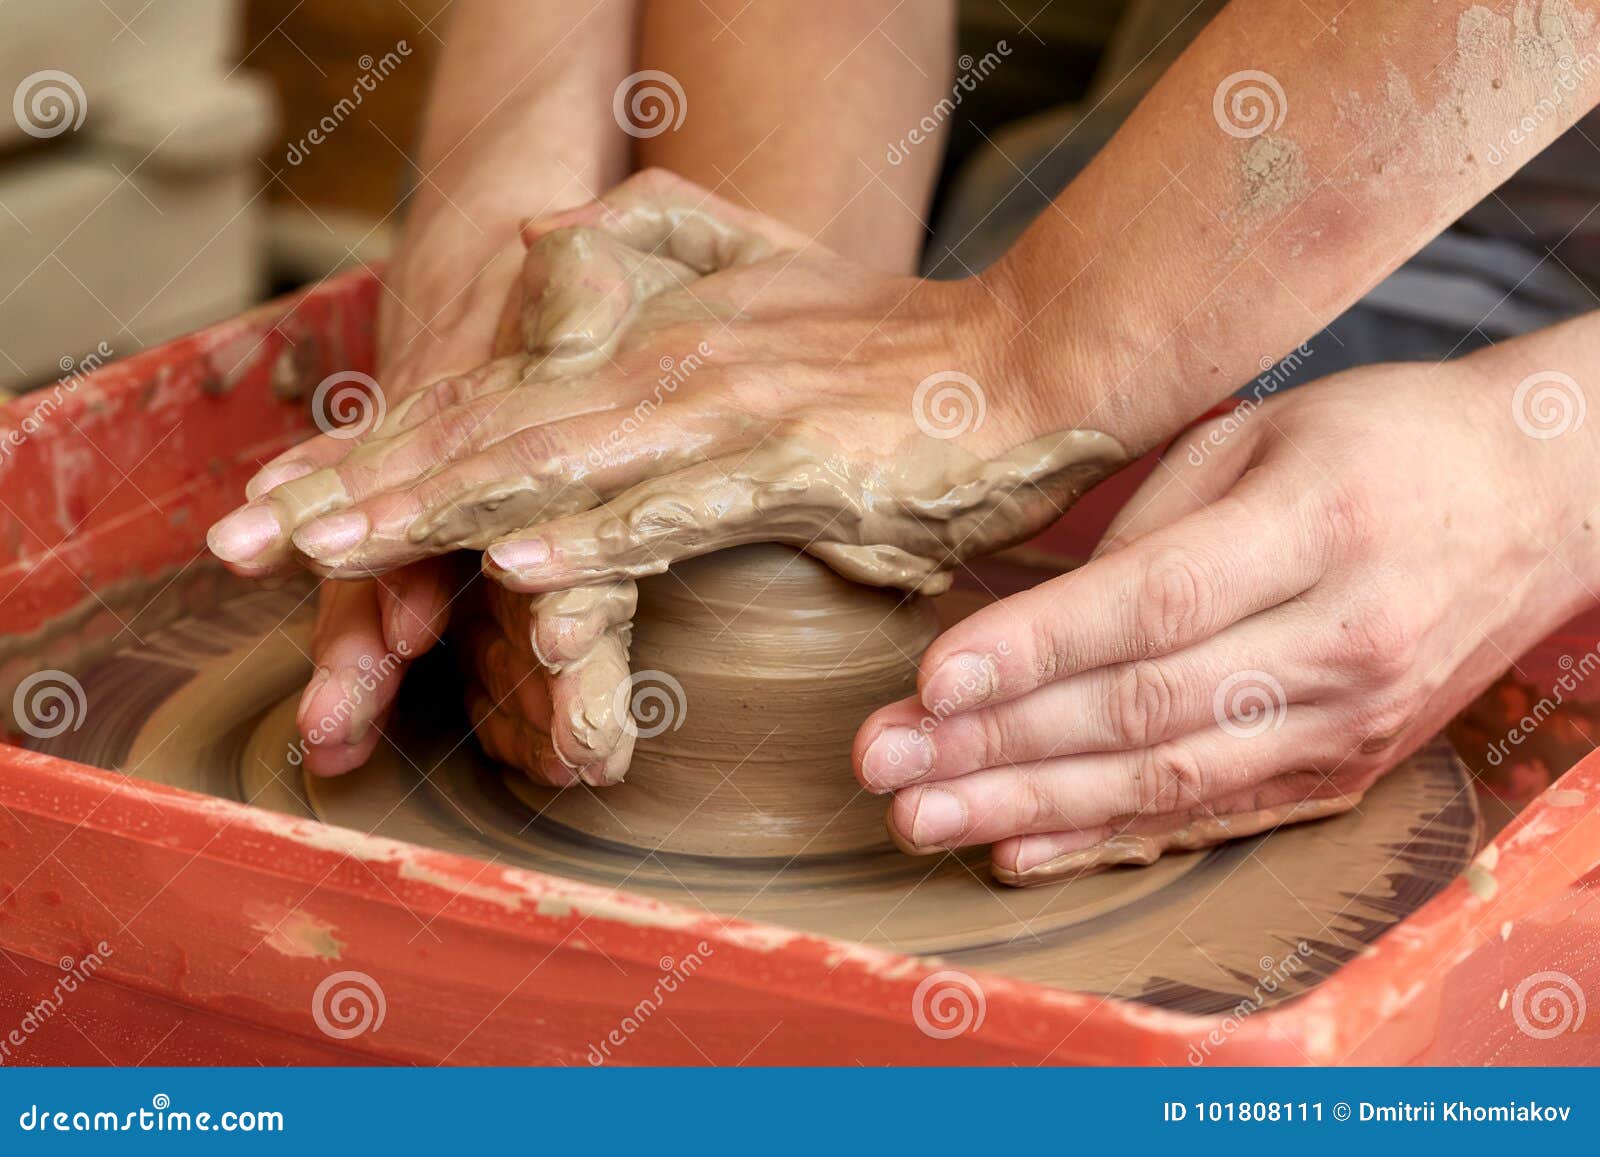 hands of two people create pot, potter`s wheel. teaching pottery